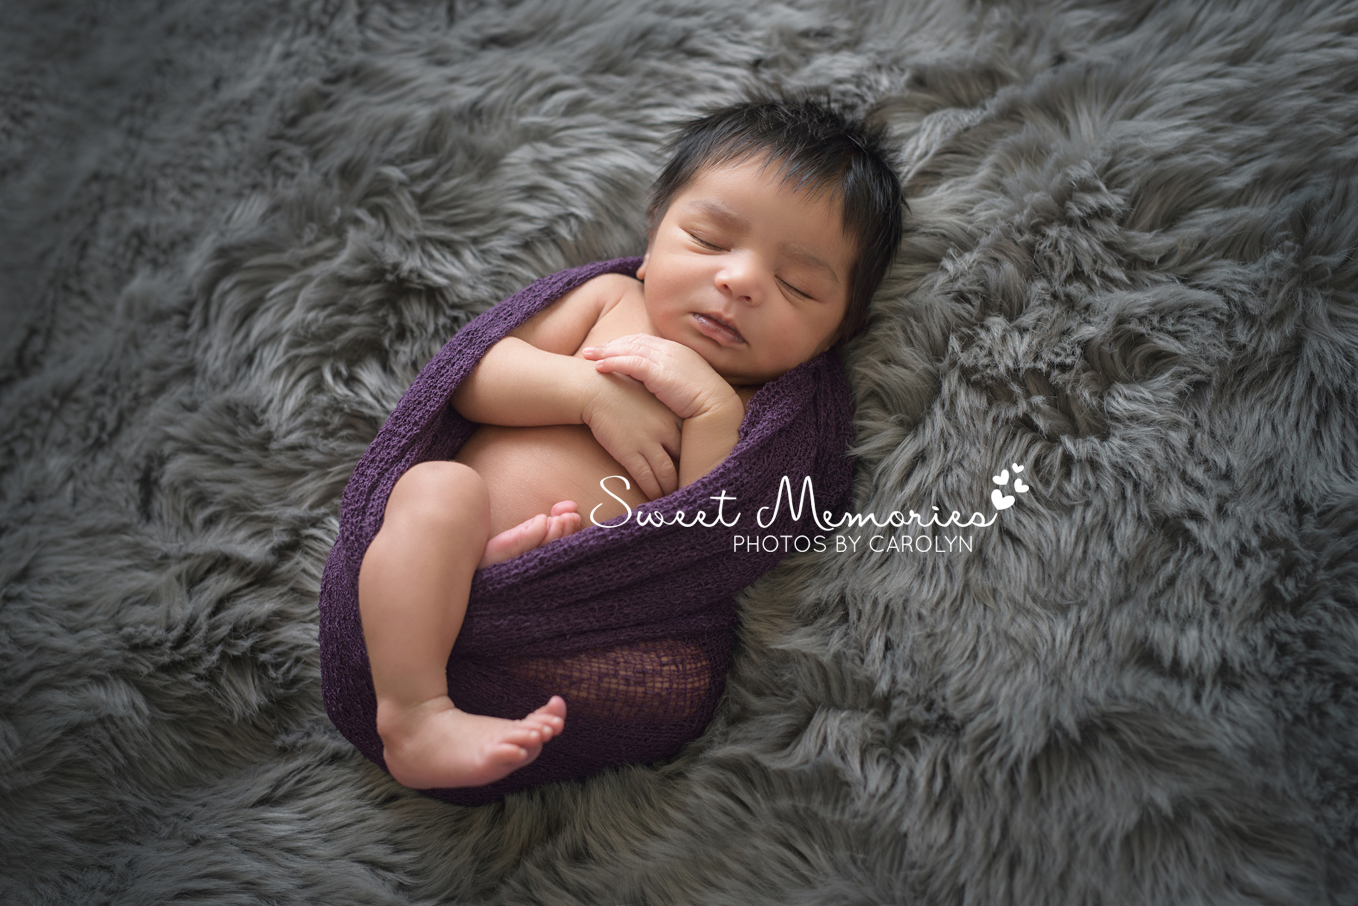 Sweet Memories Photos by Carolyn | Newtown PA | Bucks County Montgomery County Newborn Infant Baby Photographer | Indian newborn baby girl swaddled in purple on gray fur